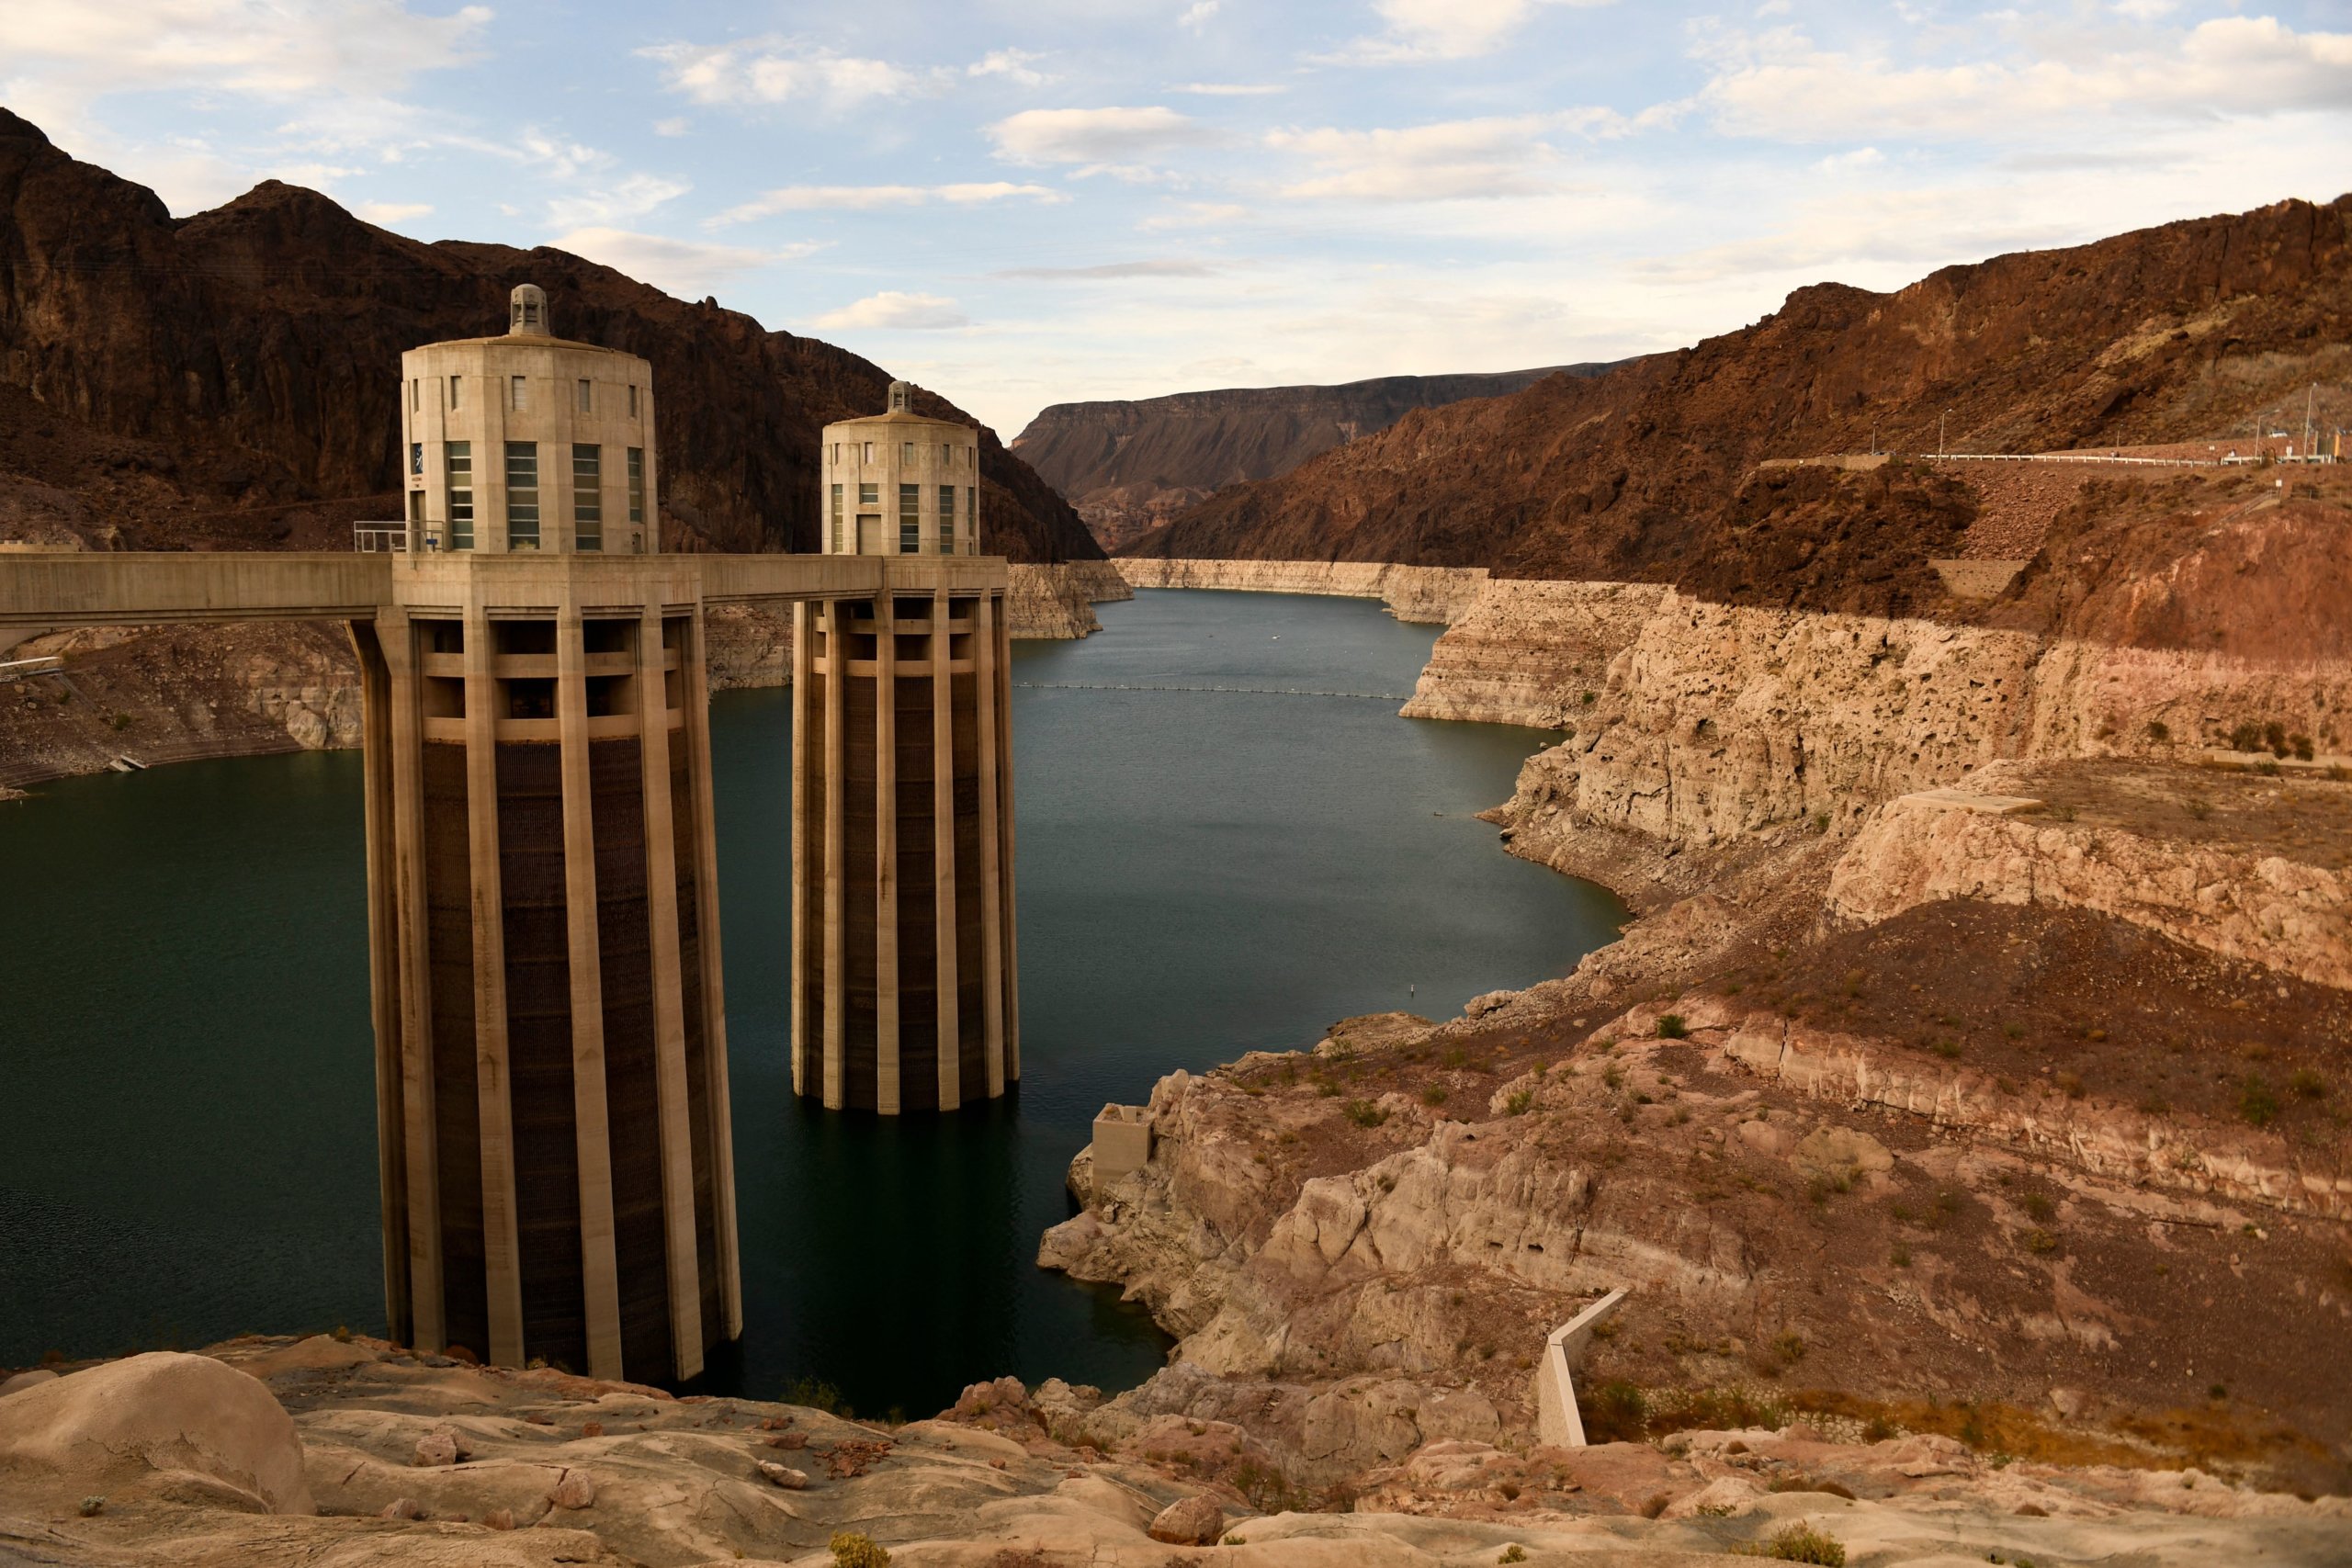 40 million people rely on the Colorado River. It’s drying up fast.